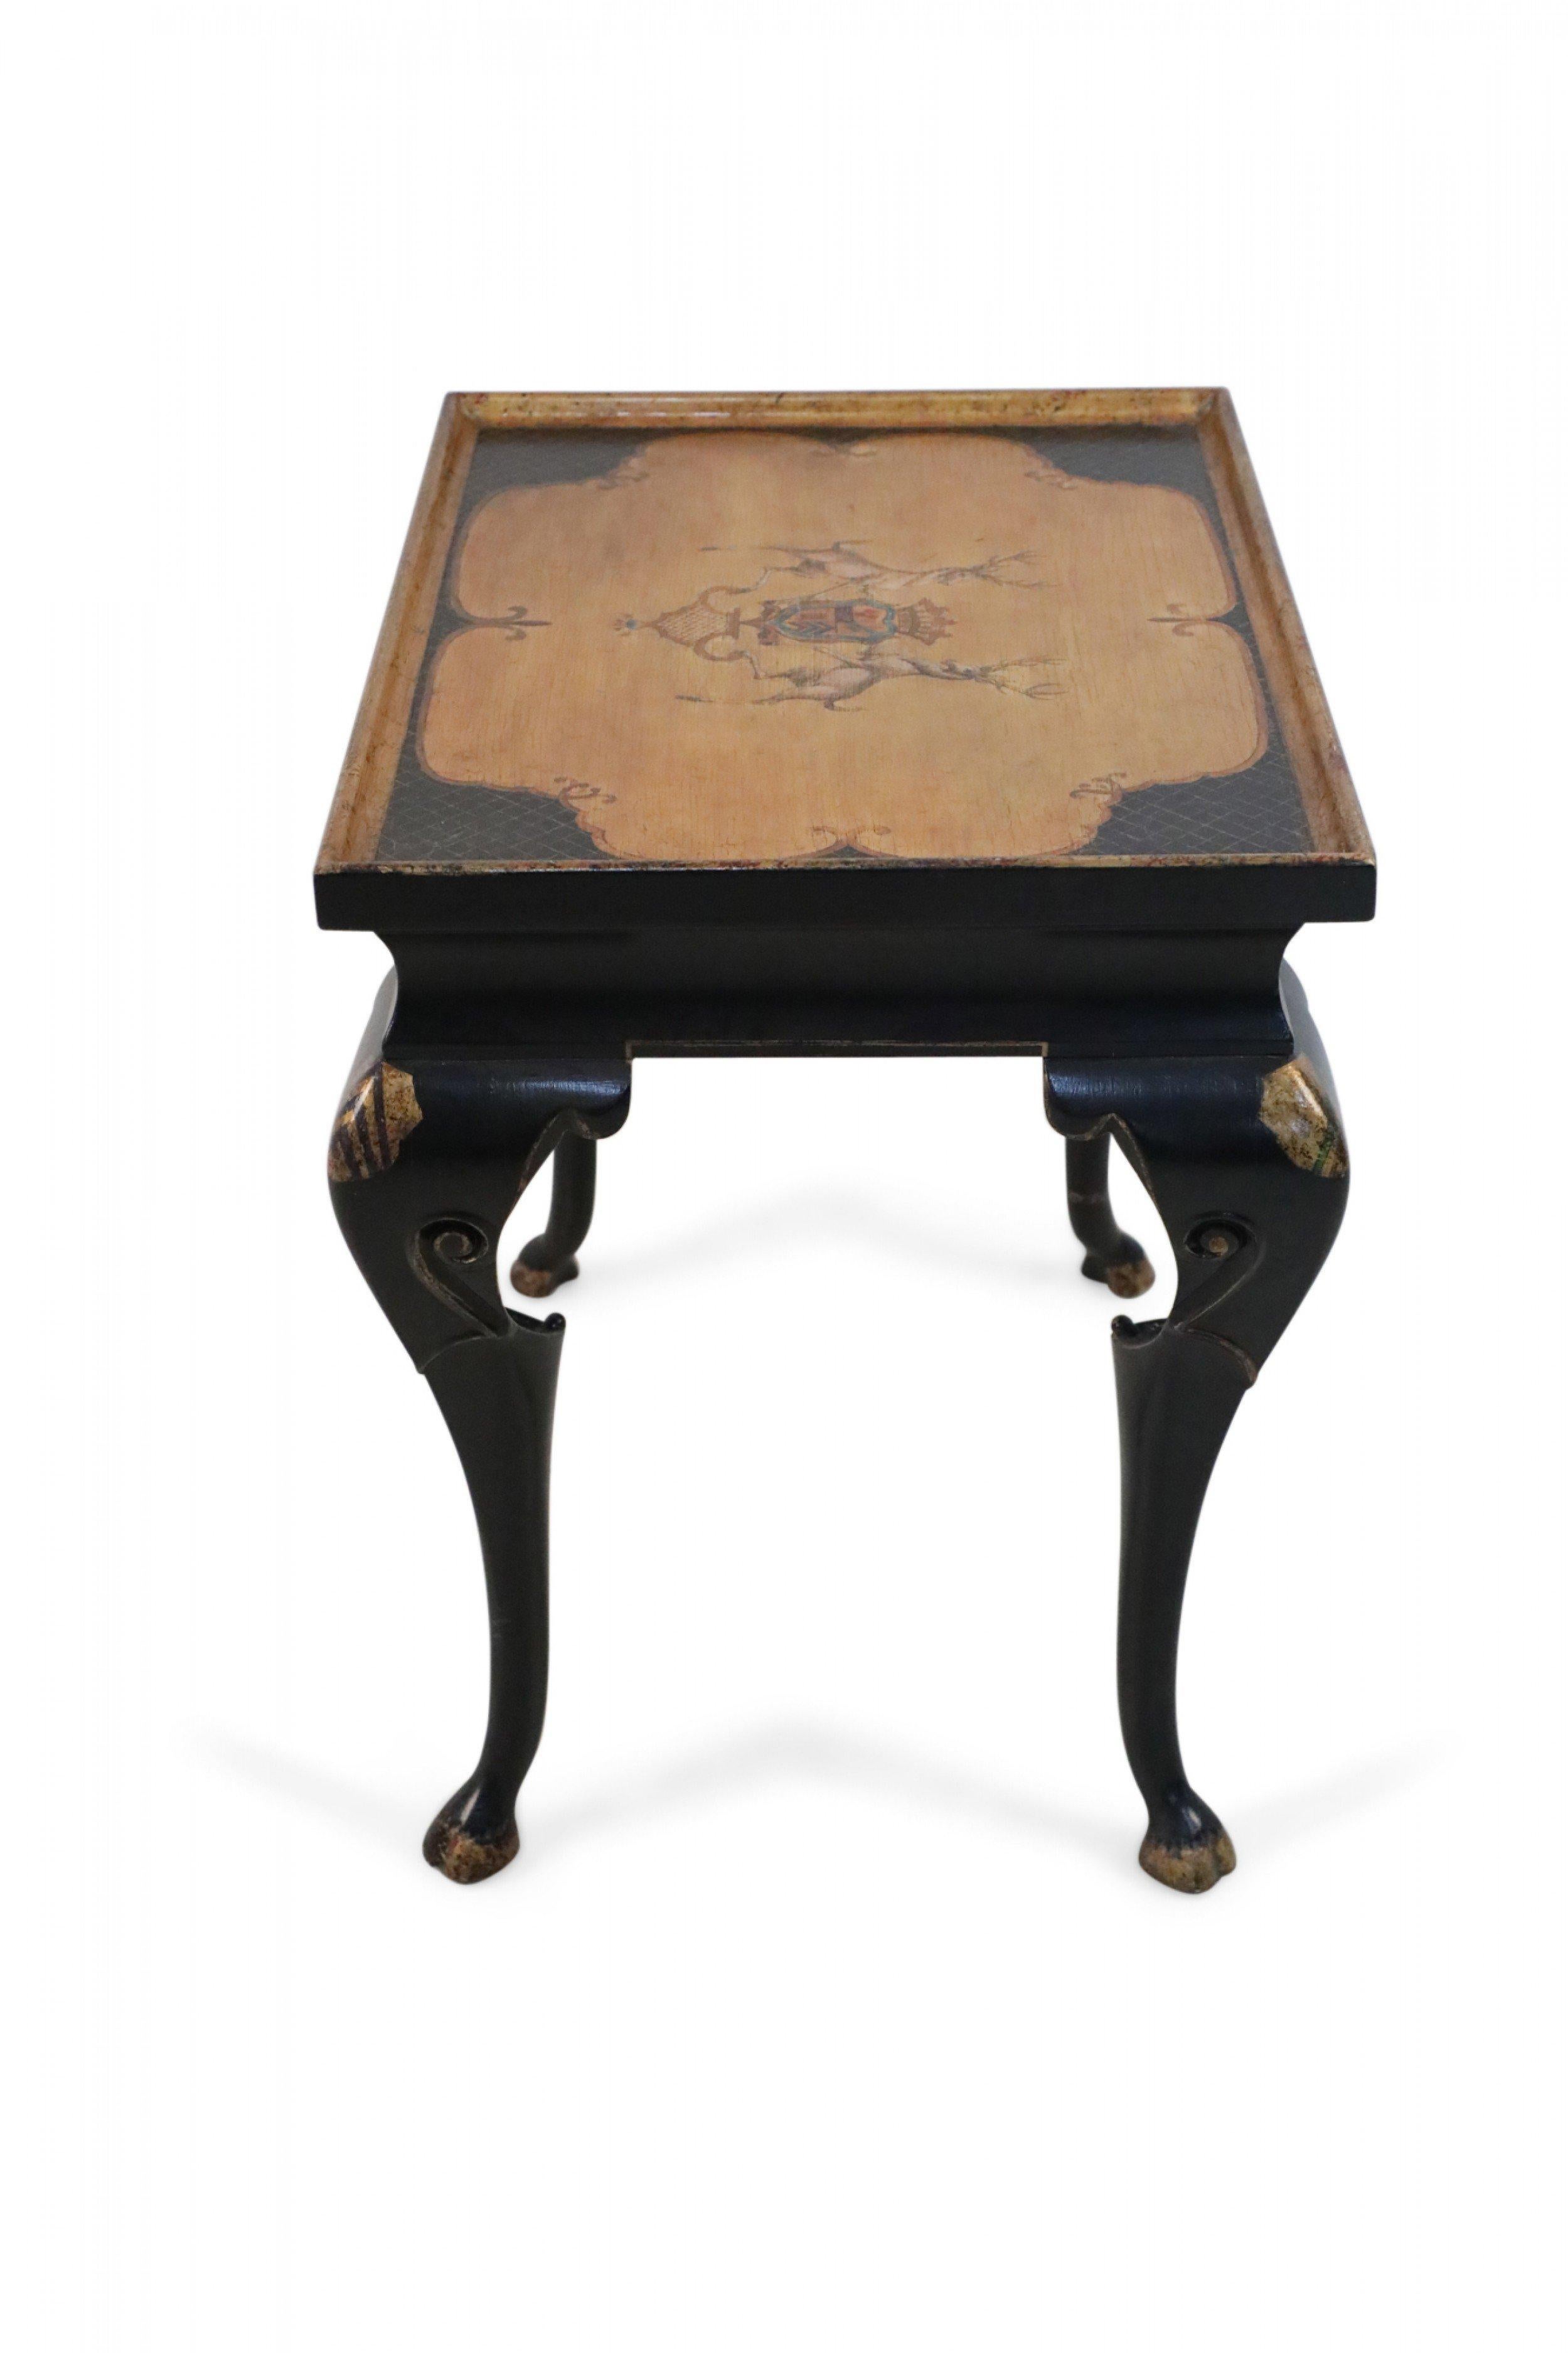 French Regence-style (modern) black end table with cabriole legs and an apron decorated in gold accents, supporting a top with golden lattice patterns on a black ground surrounding a bare wooden medallion painted with two deer flanking a coat of